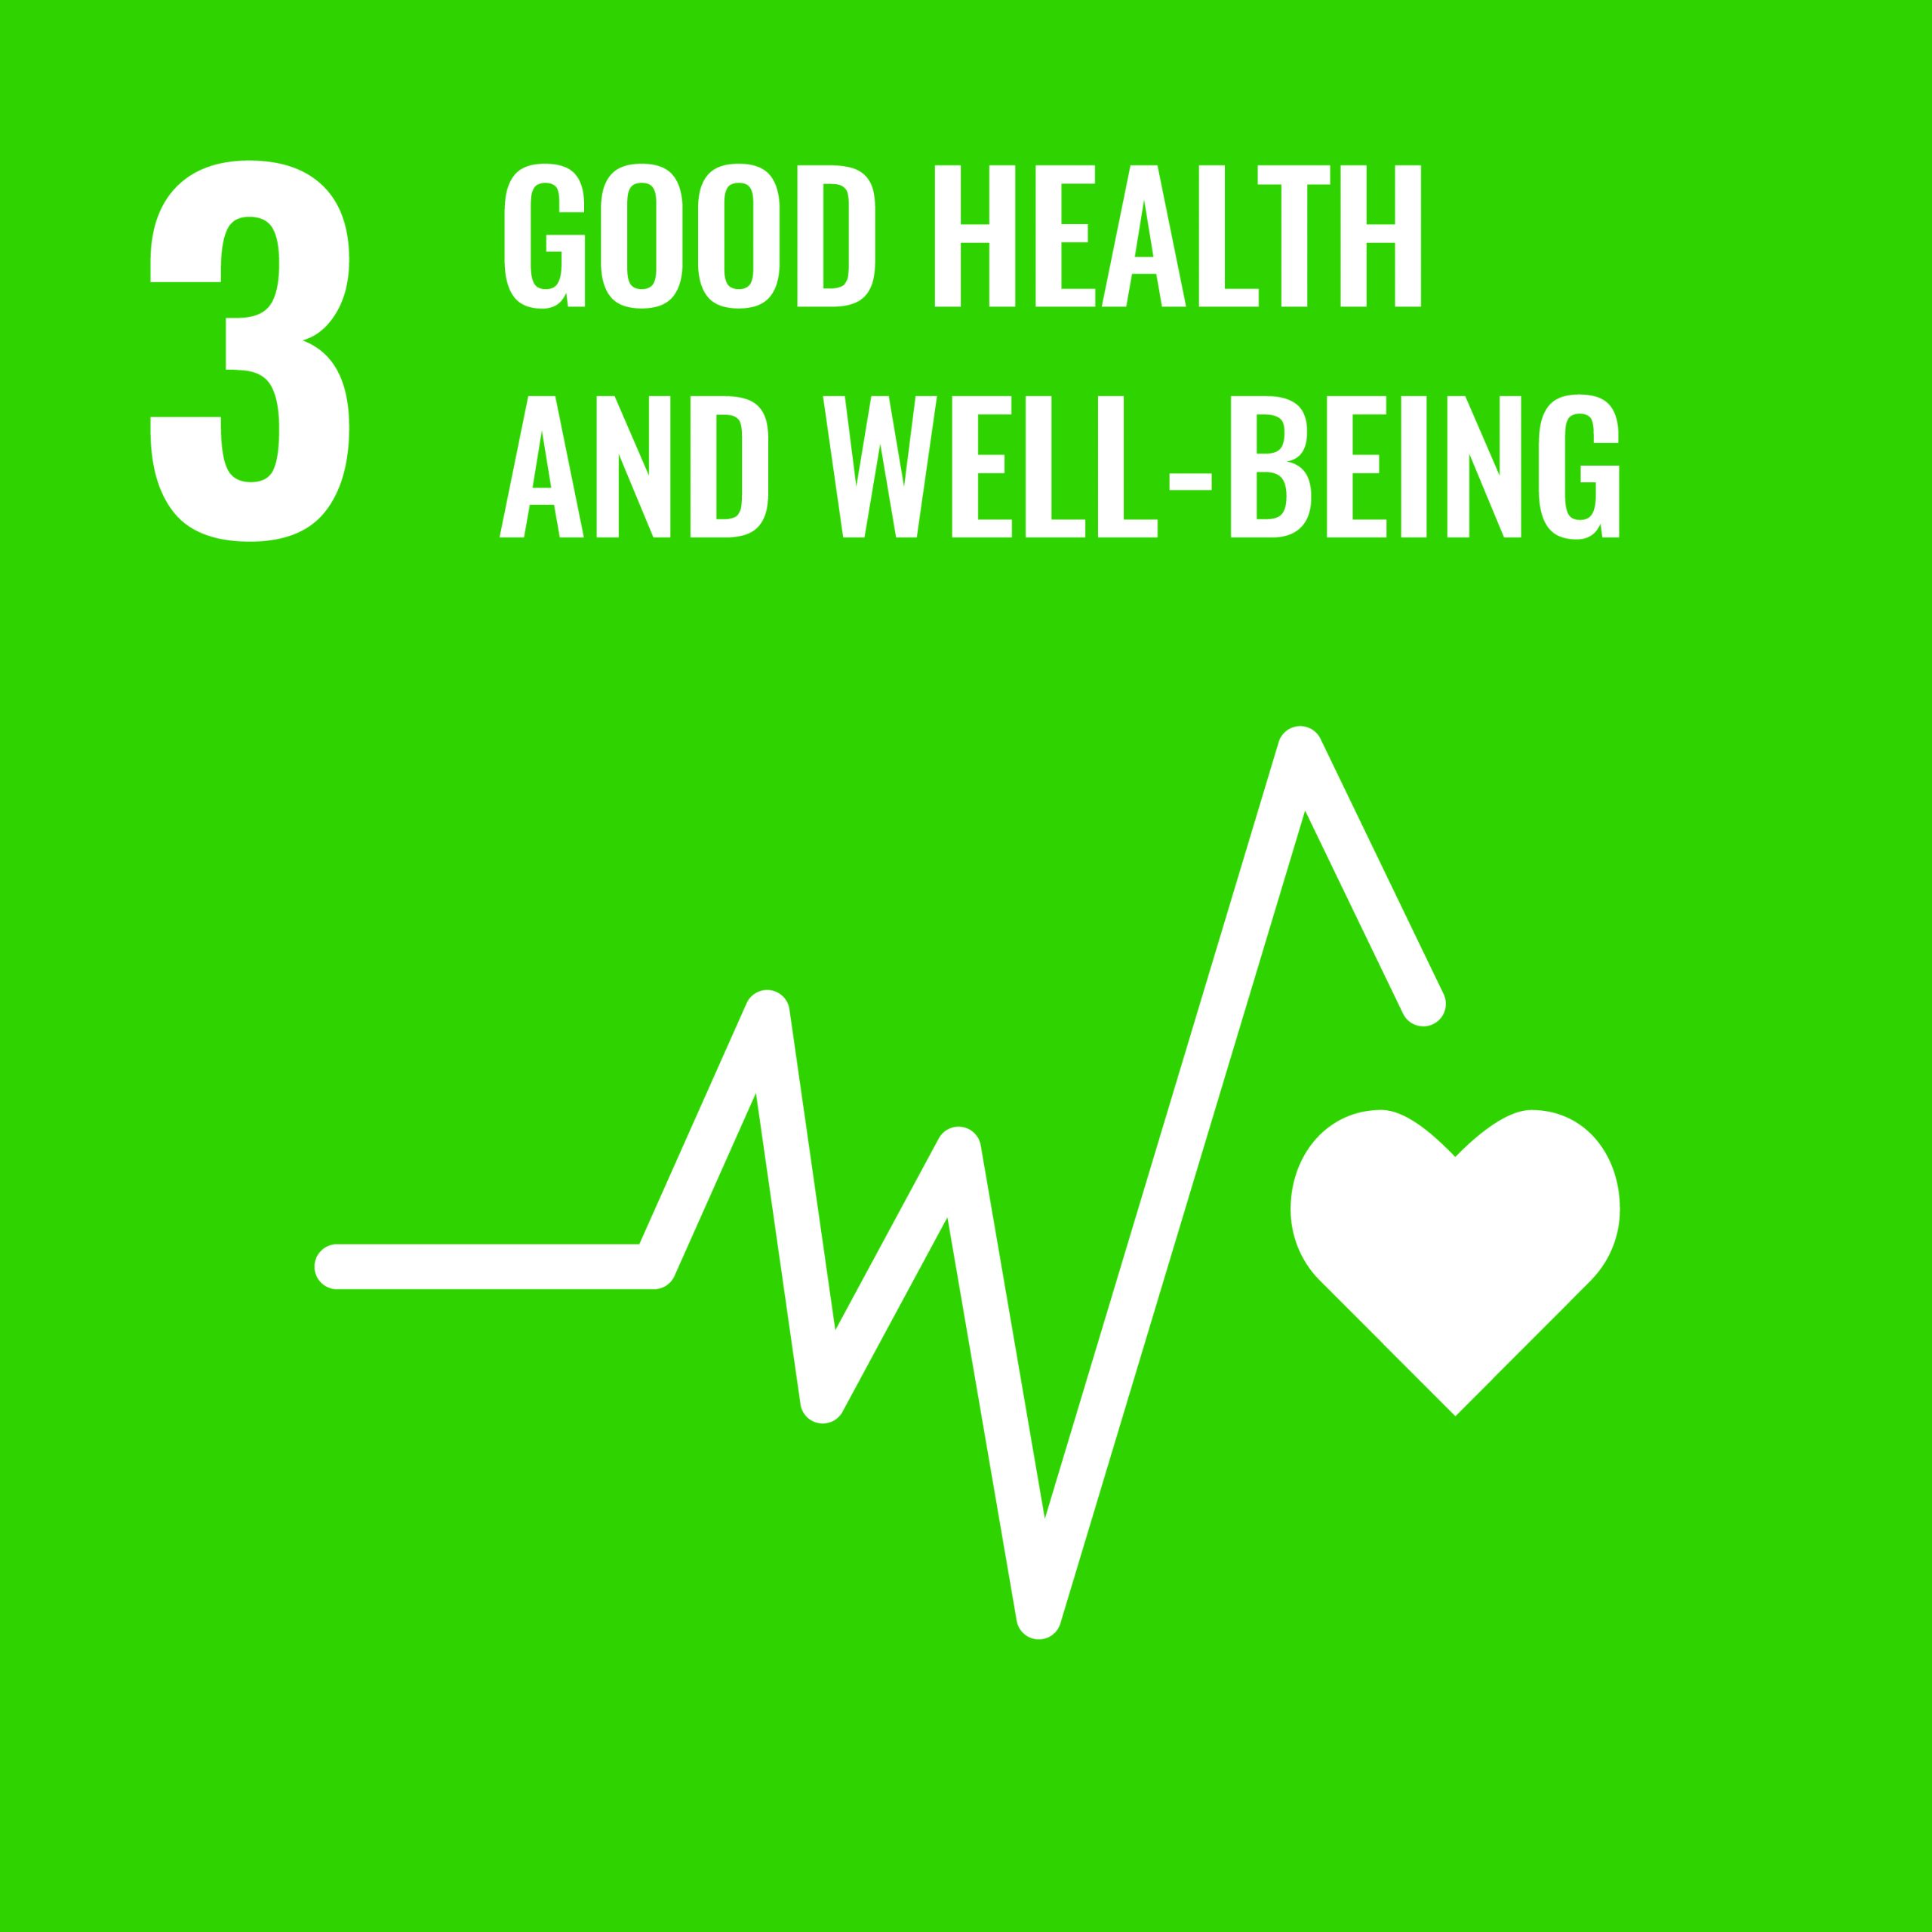 Good health and wellbeing - SDG 3